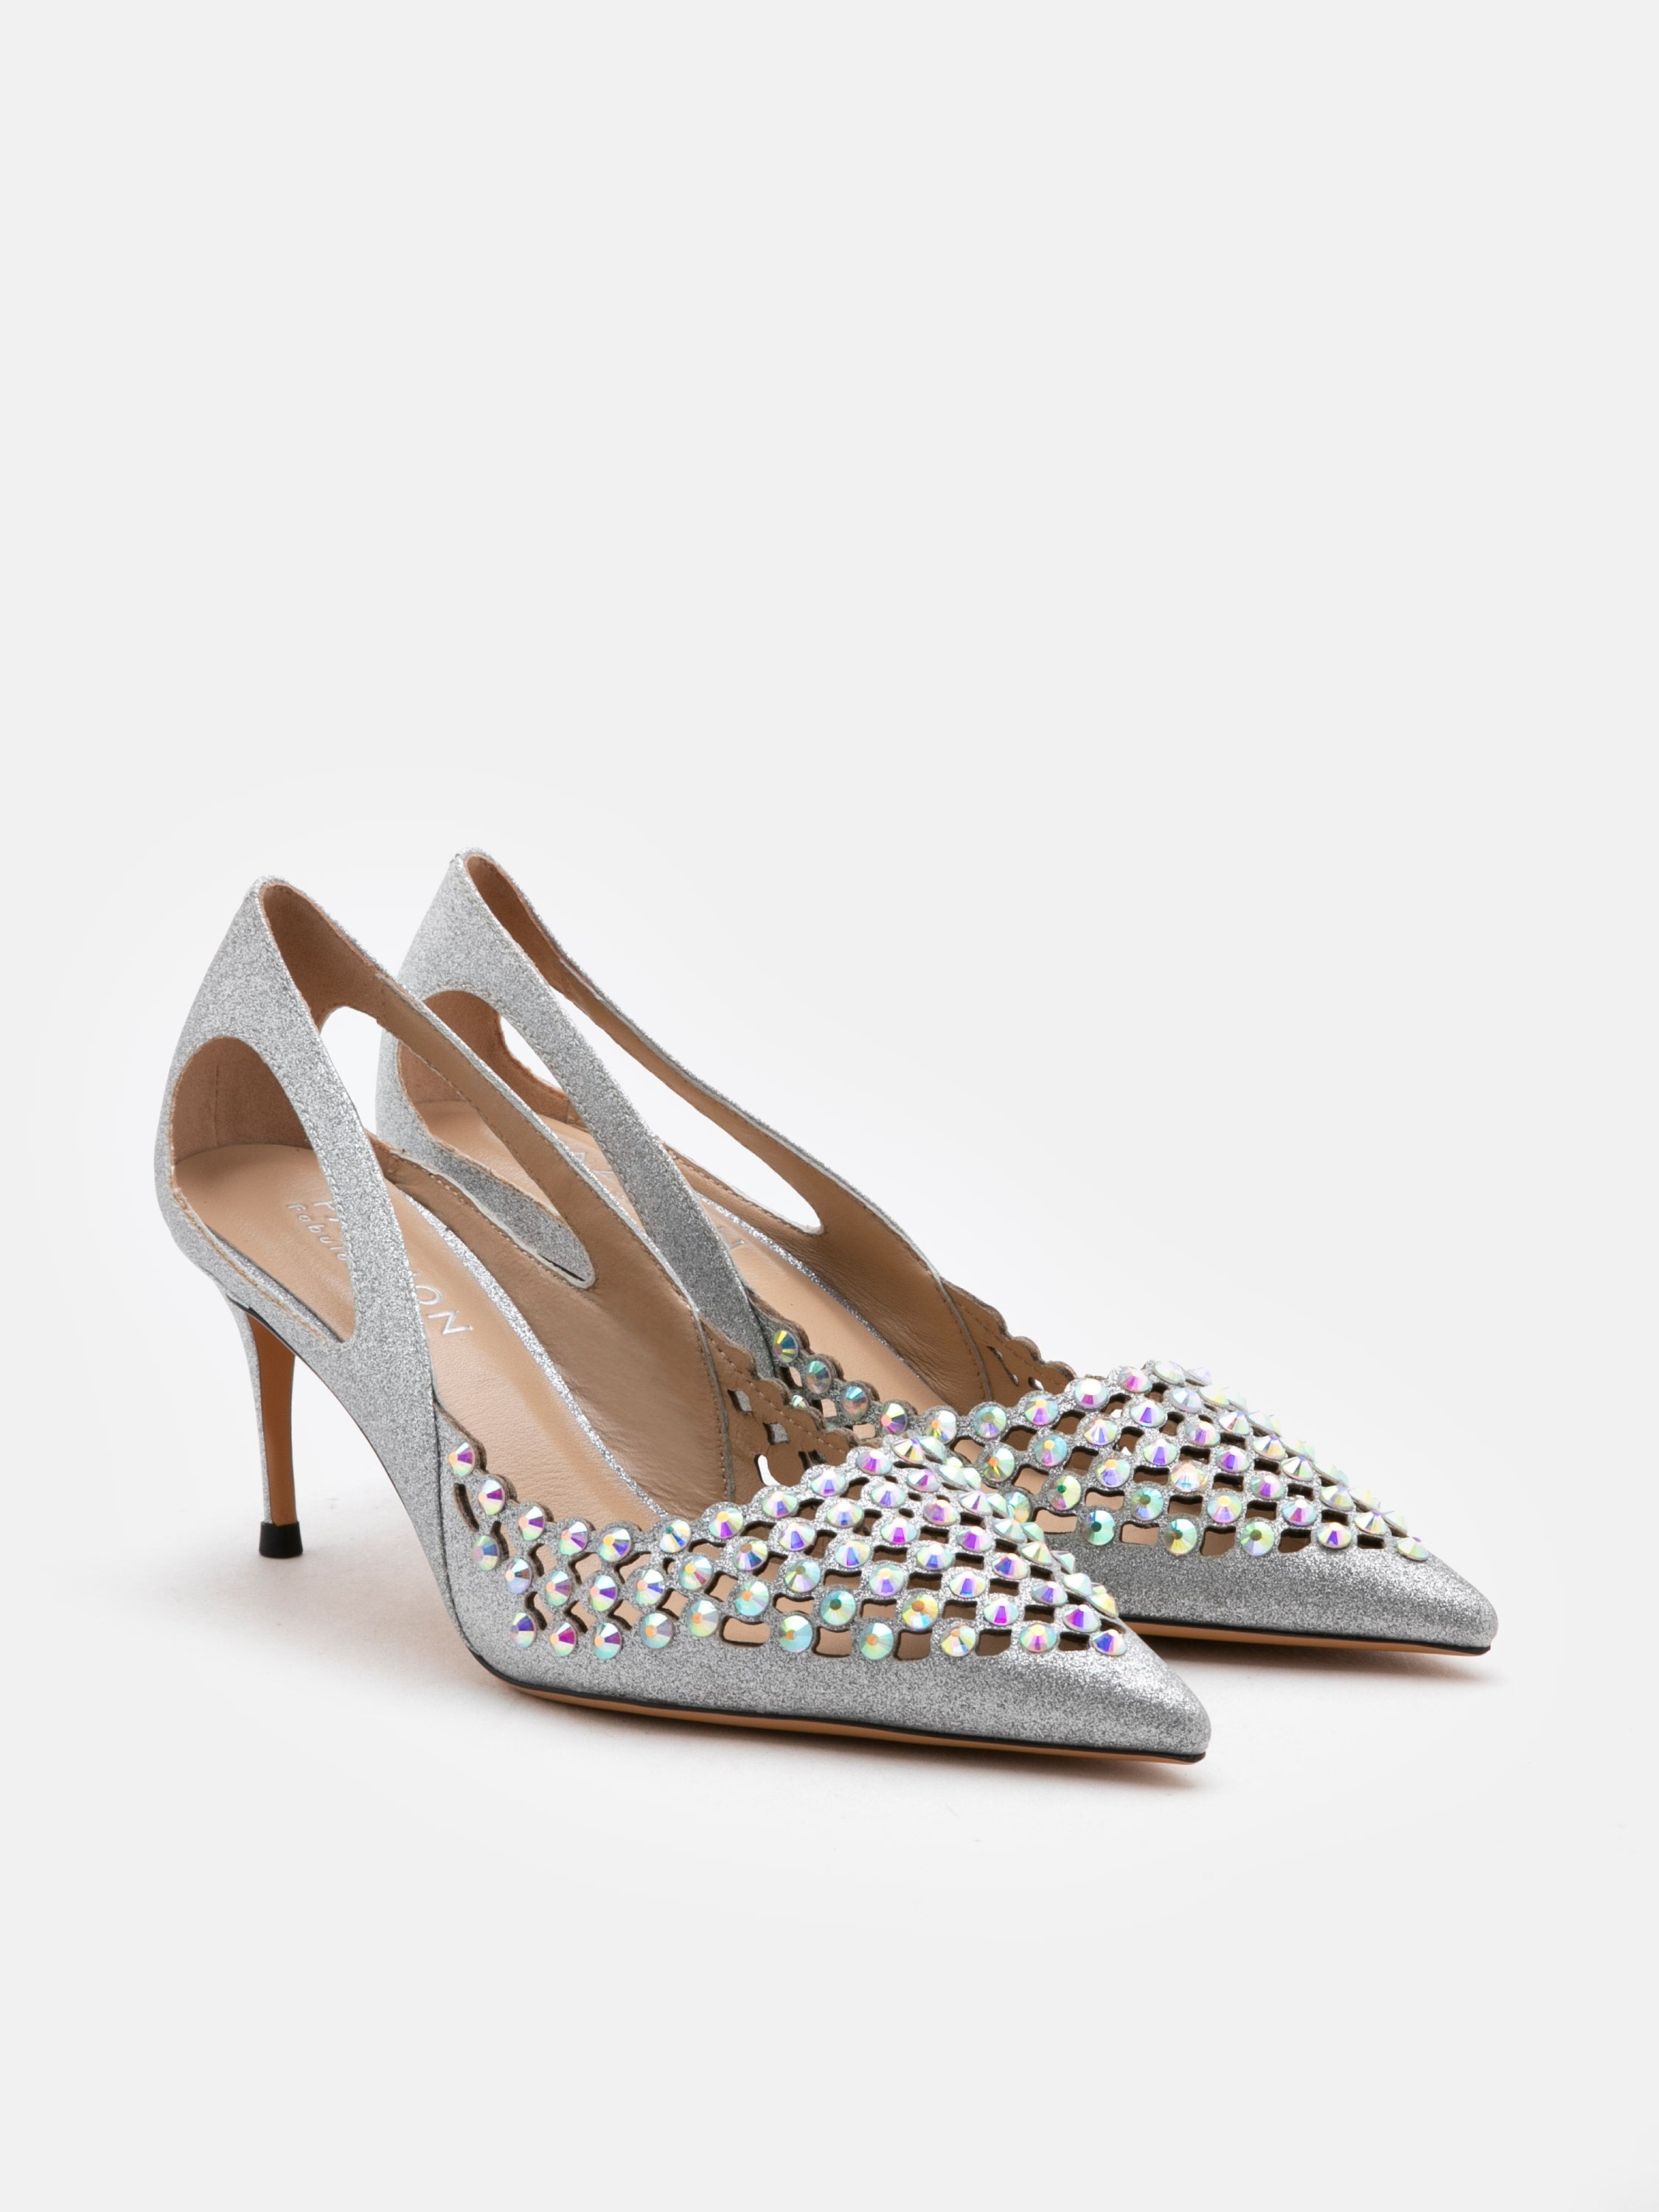 Feathered Embellished Strappy Heels (White)- FINAL SALE – Lilly's Kloset